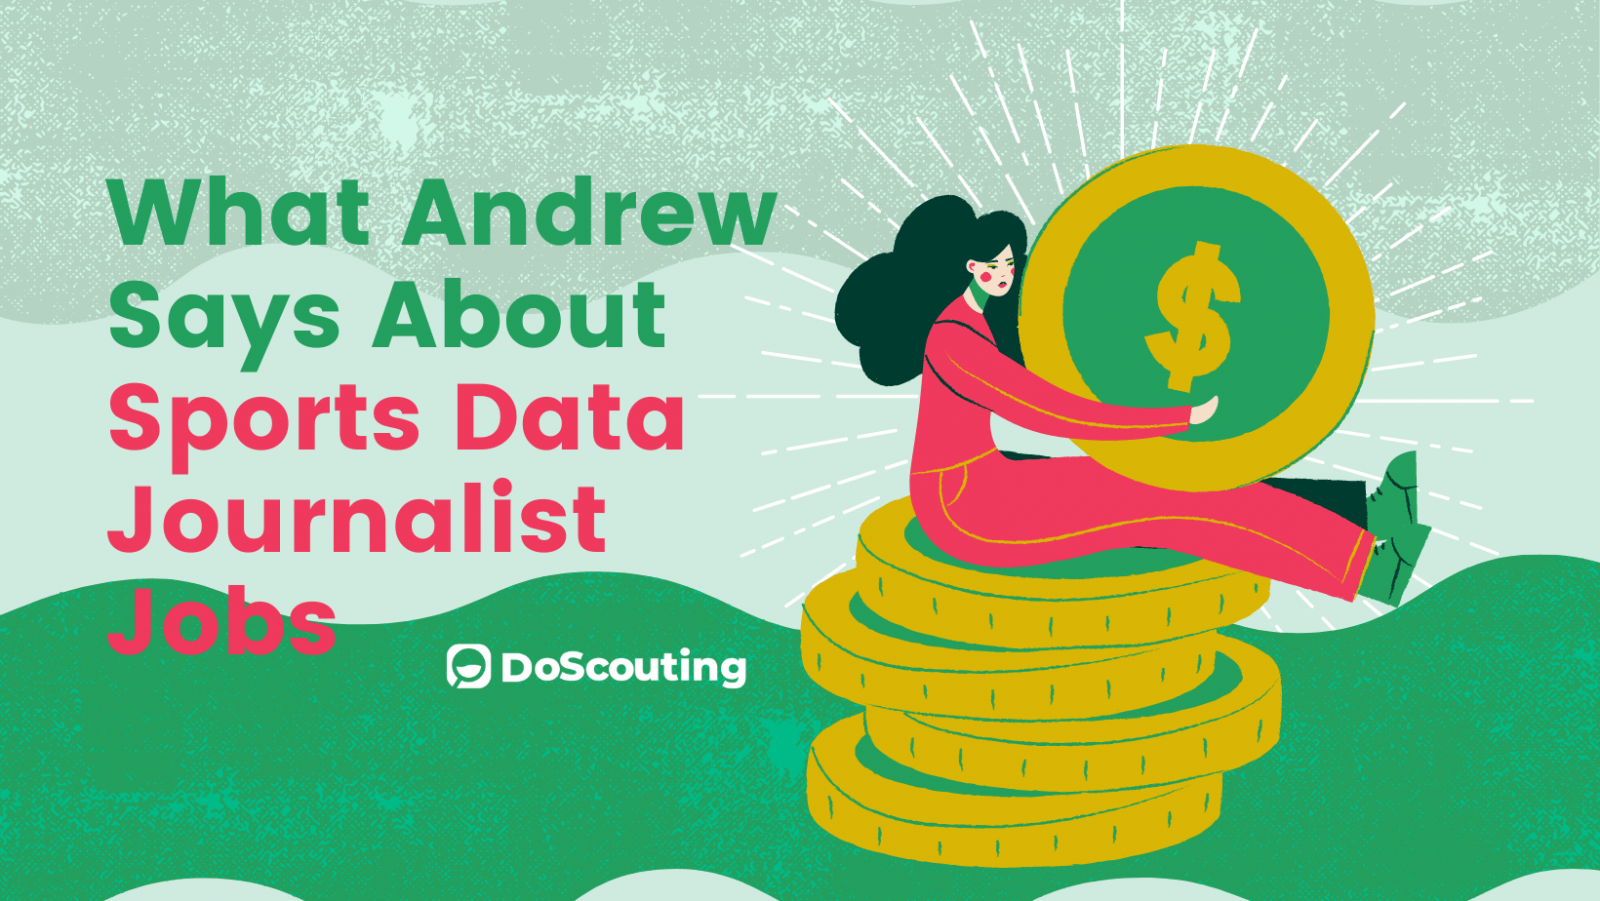 What Andrew Says About the Sports Data Journalist Job?